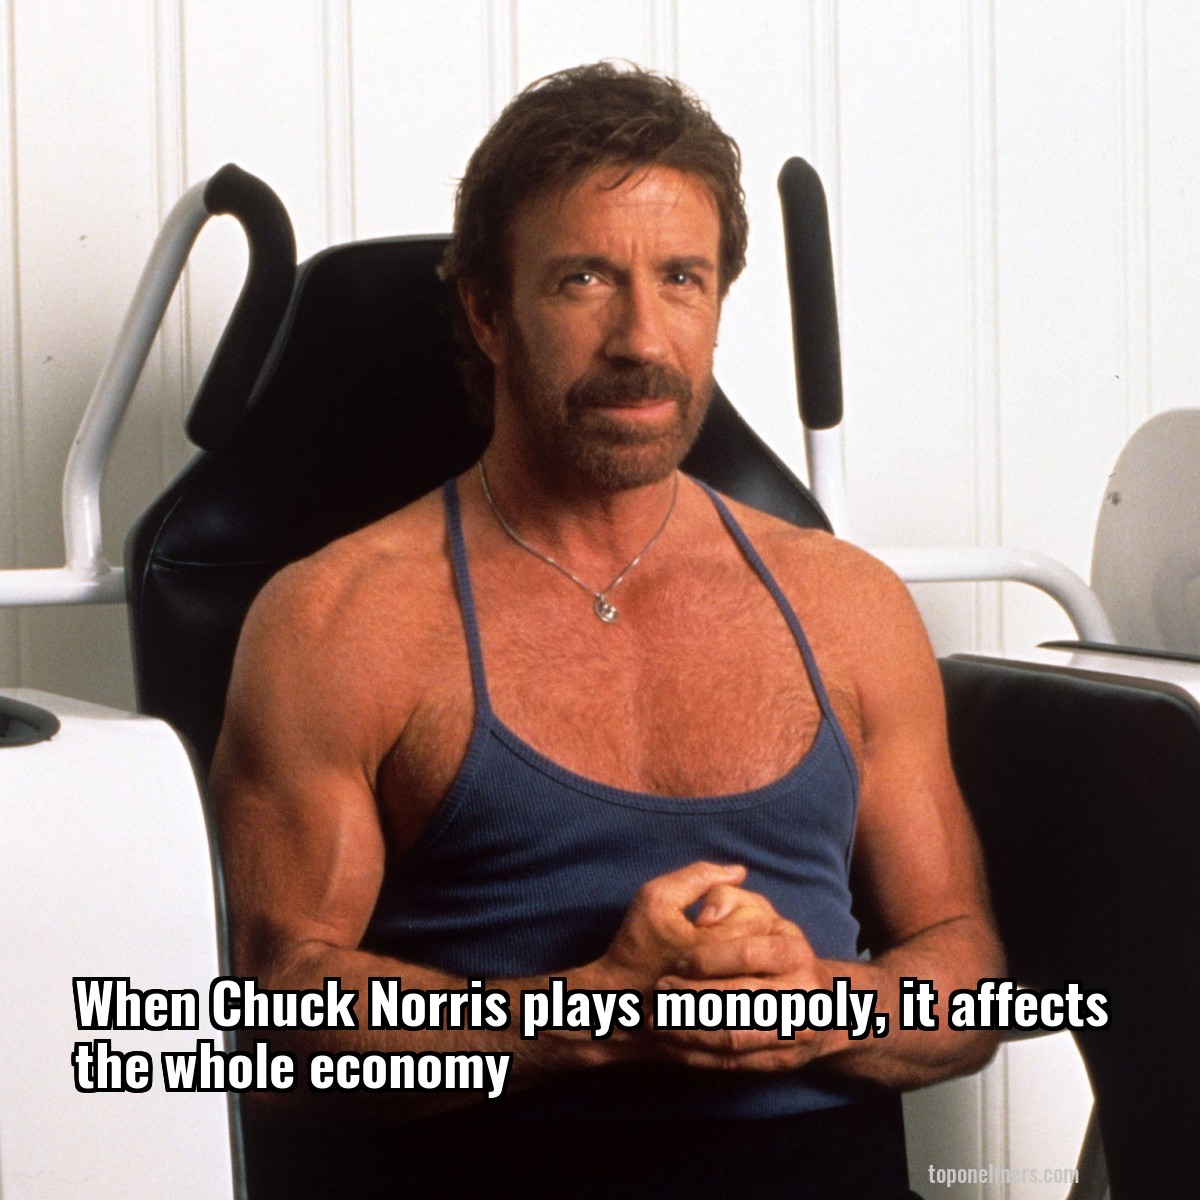 When Chuck Norris plays monopoly, it affects the whole economy